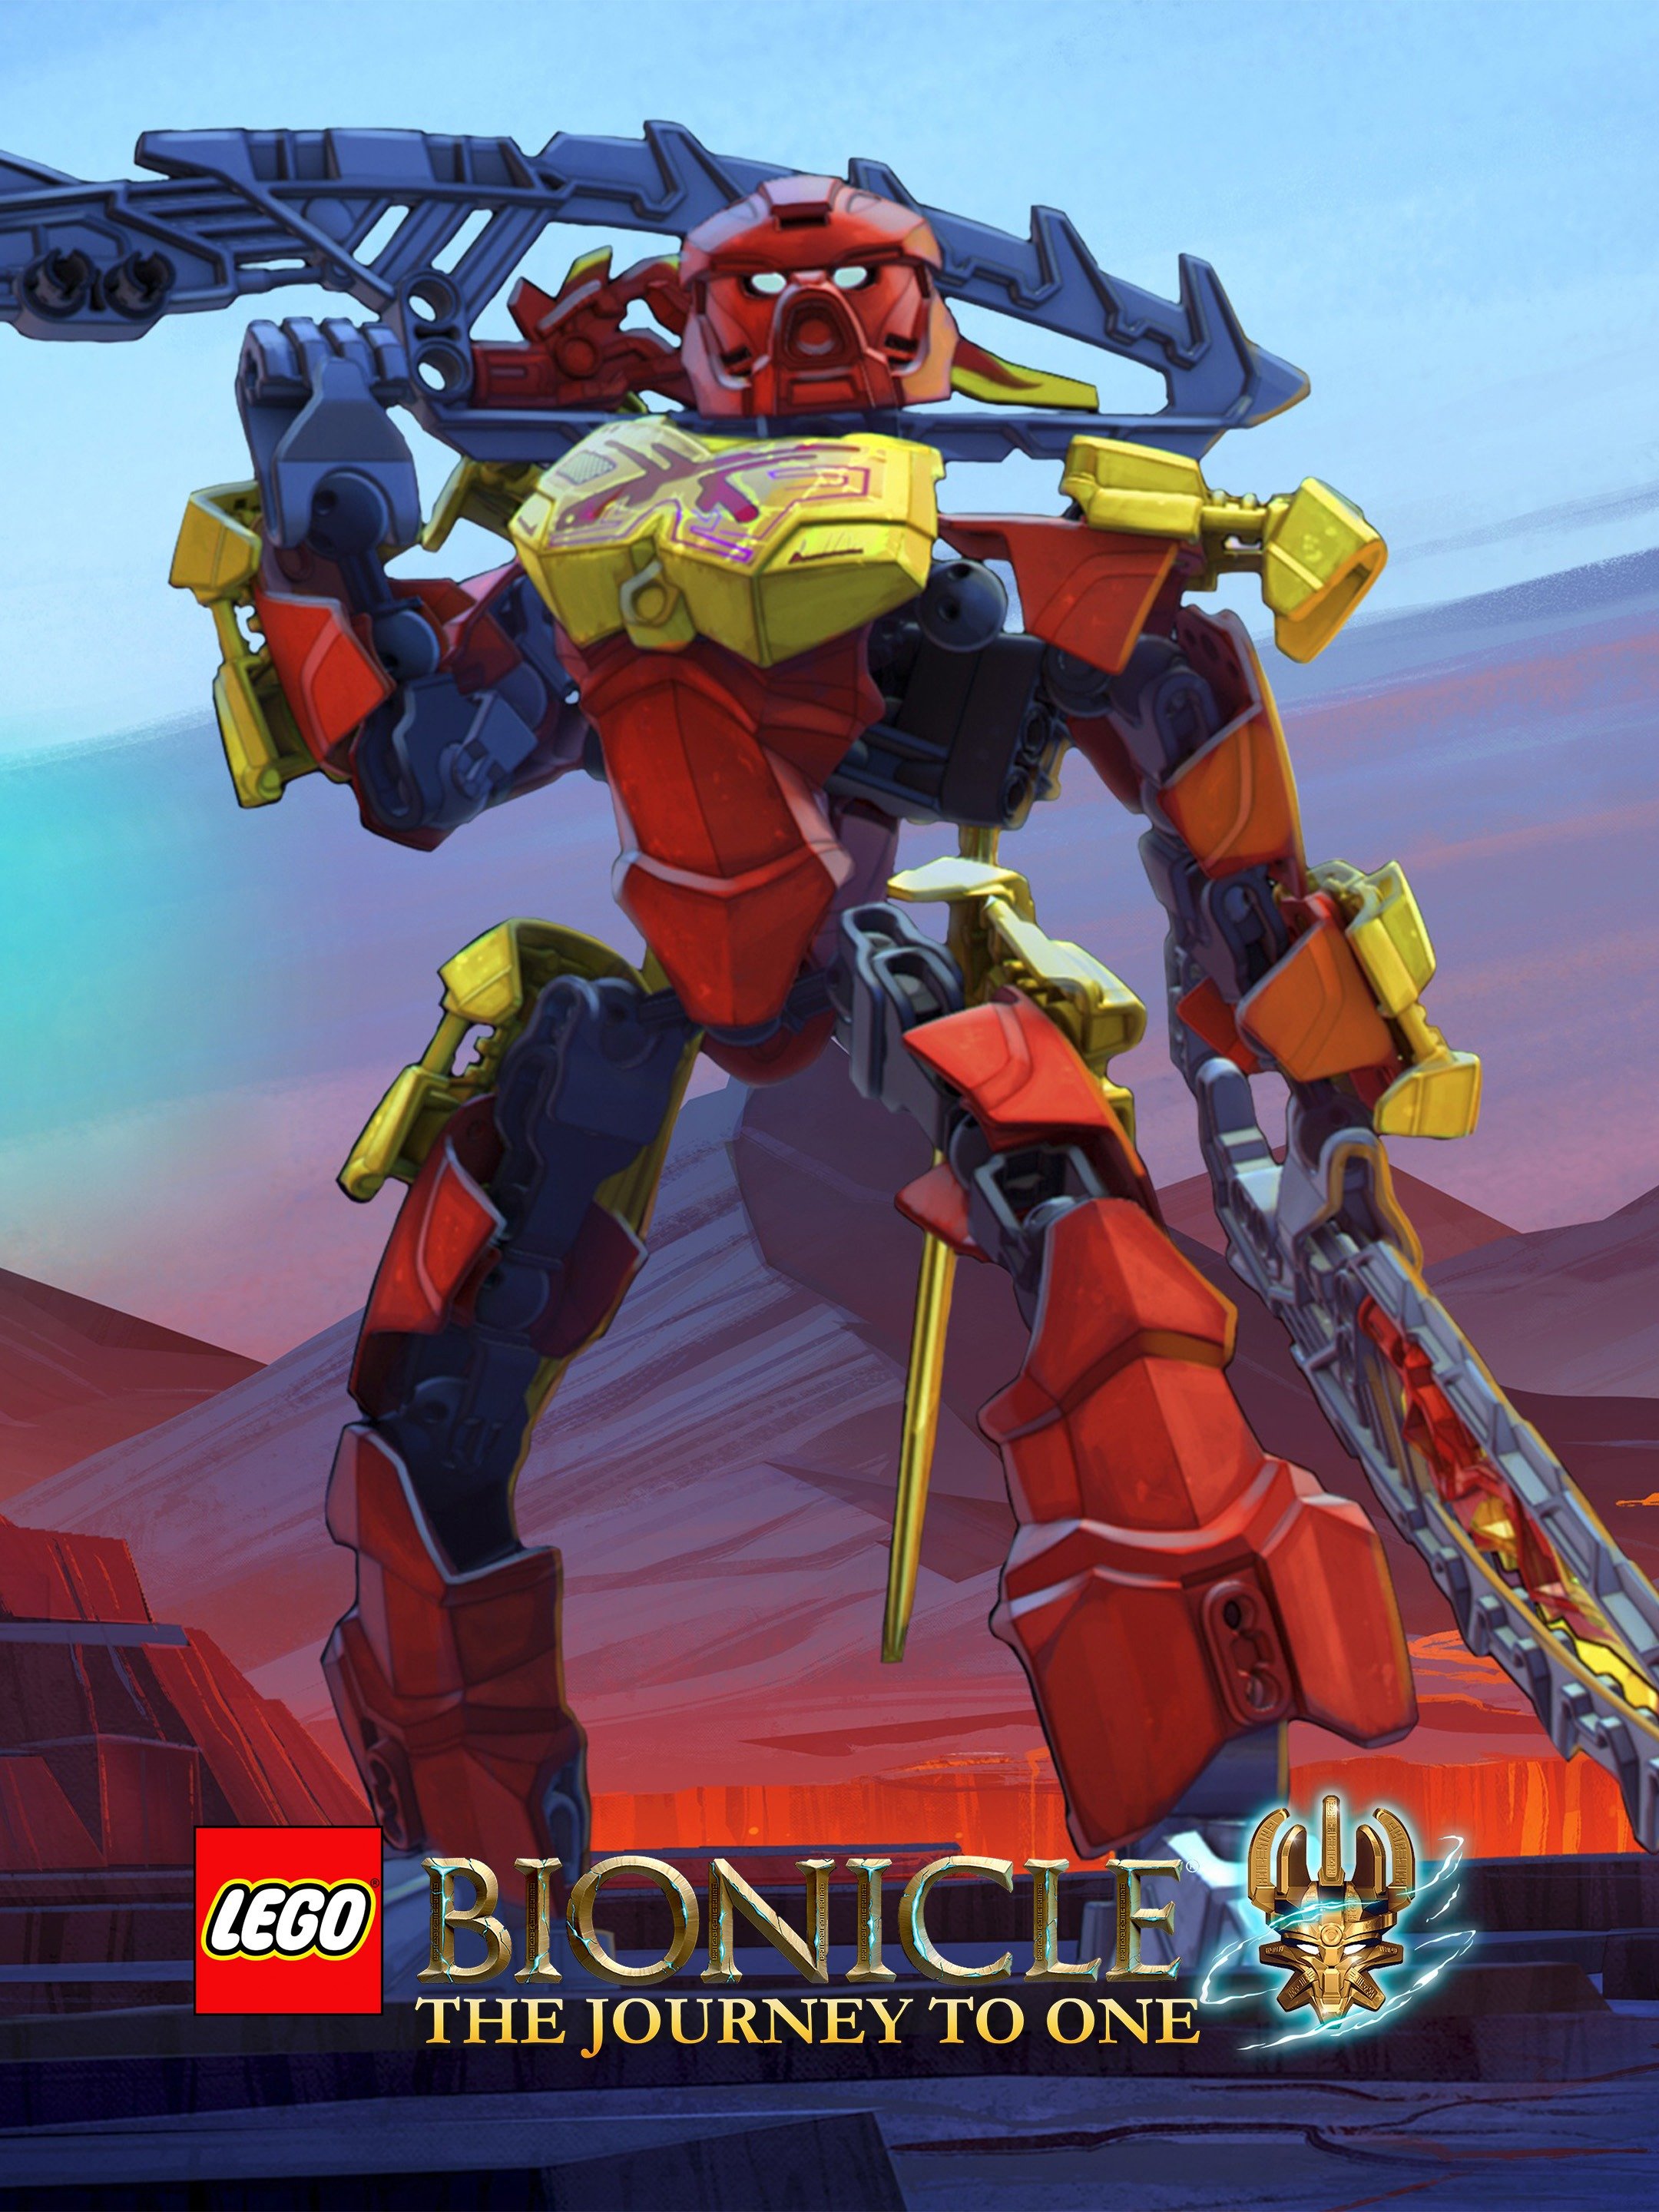 LEGO Bionicle The Journey to One Season 2 Pictures Rotten Tomatoes